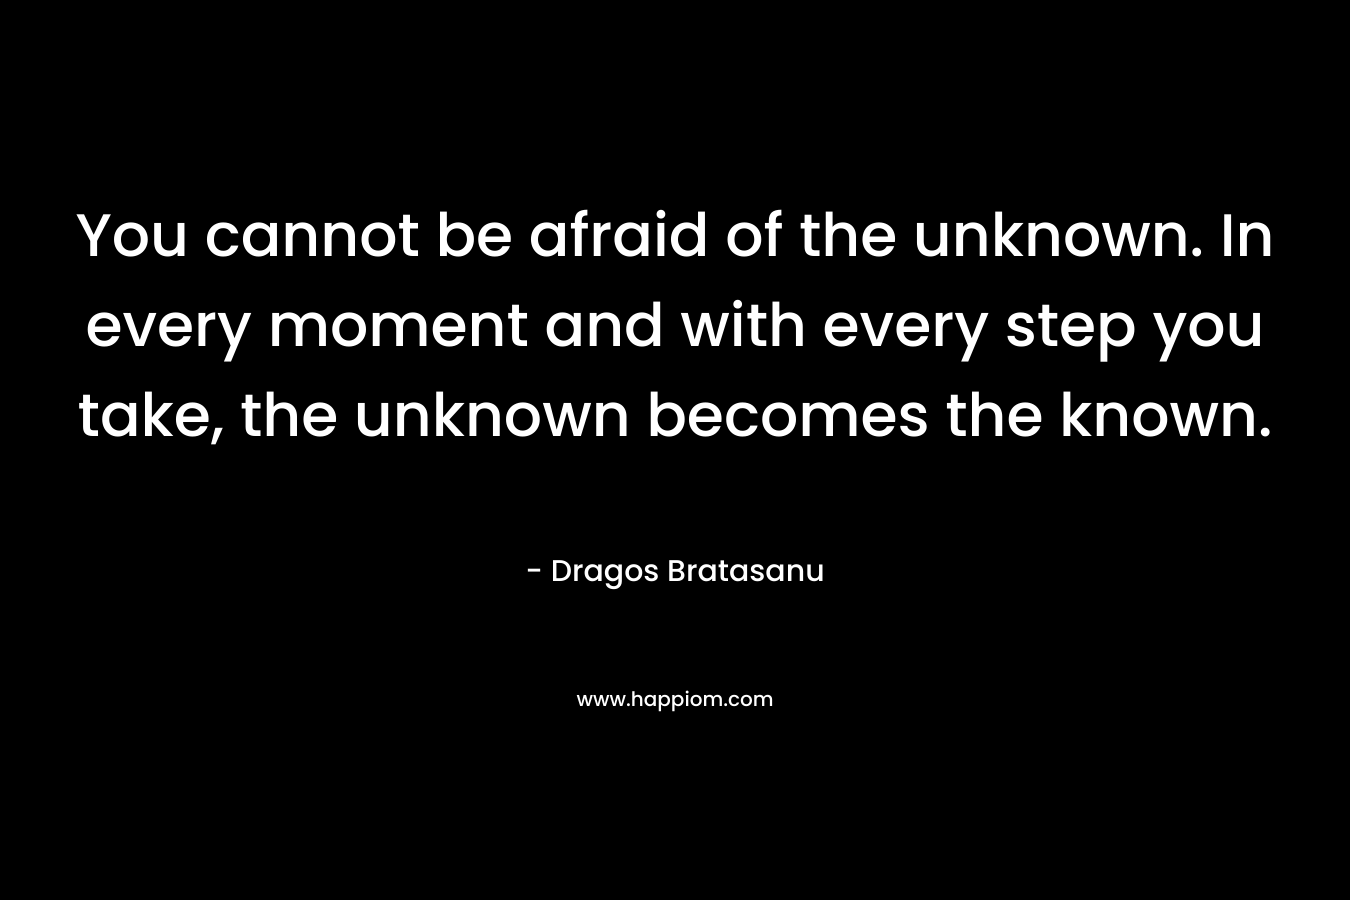 You cannot be afraid of the unknown. In every moment and with every step you take, the unknown becomes the known.